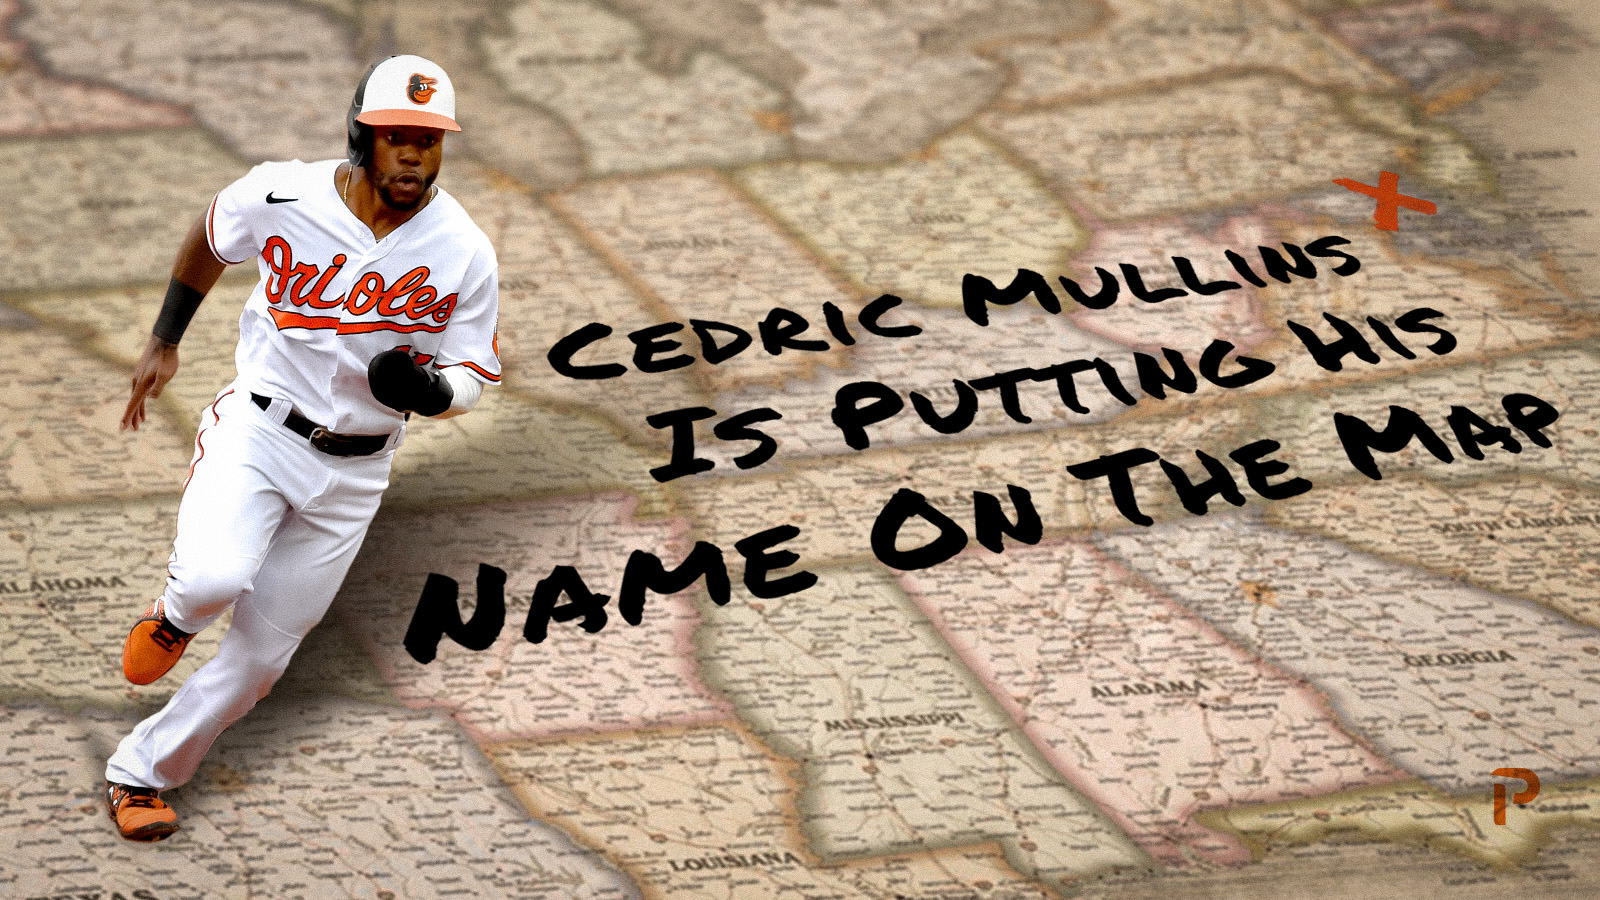 Cedric Mullins is Putting His Name on the Map